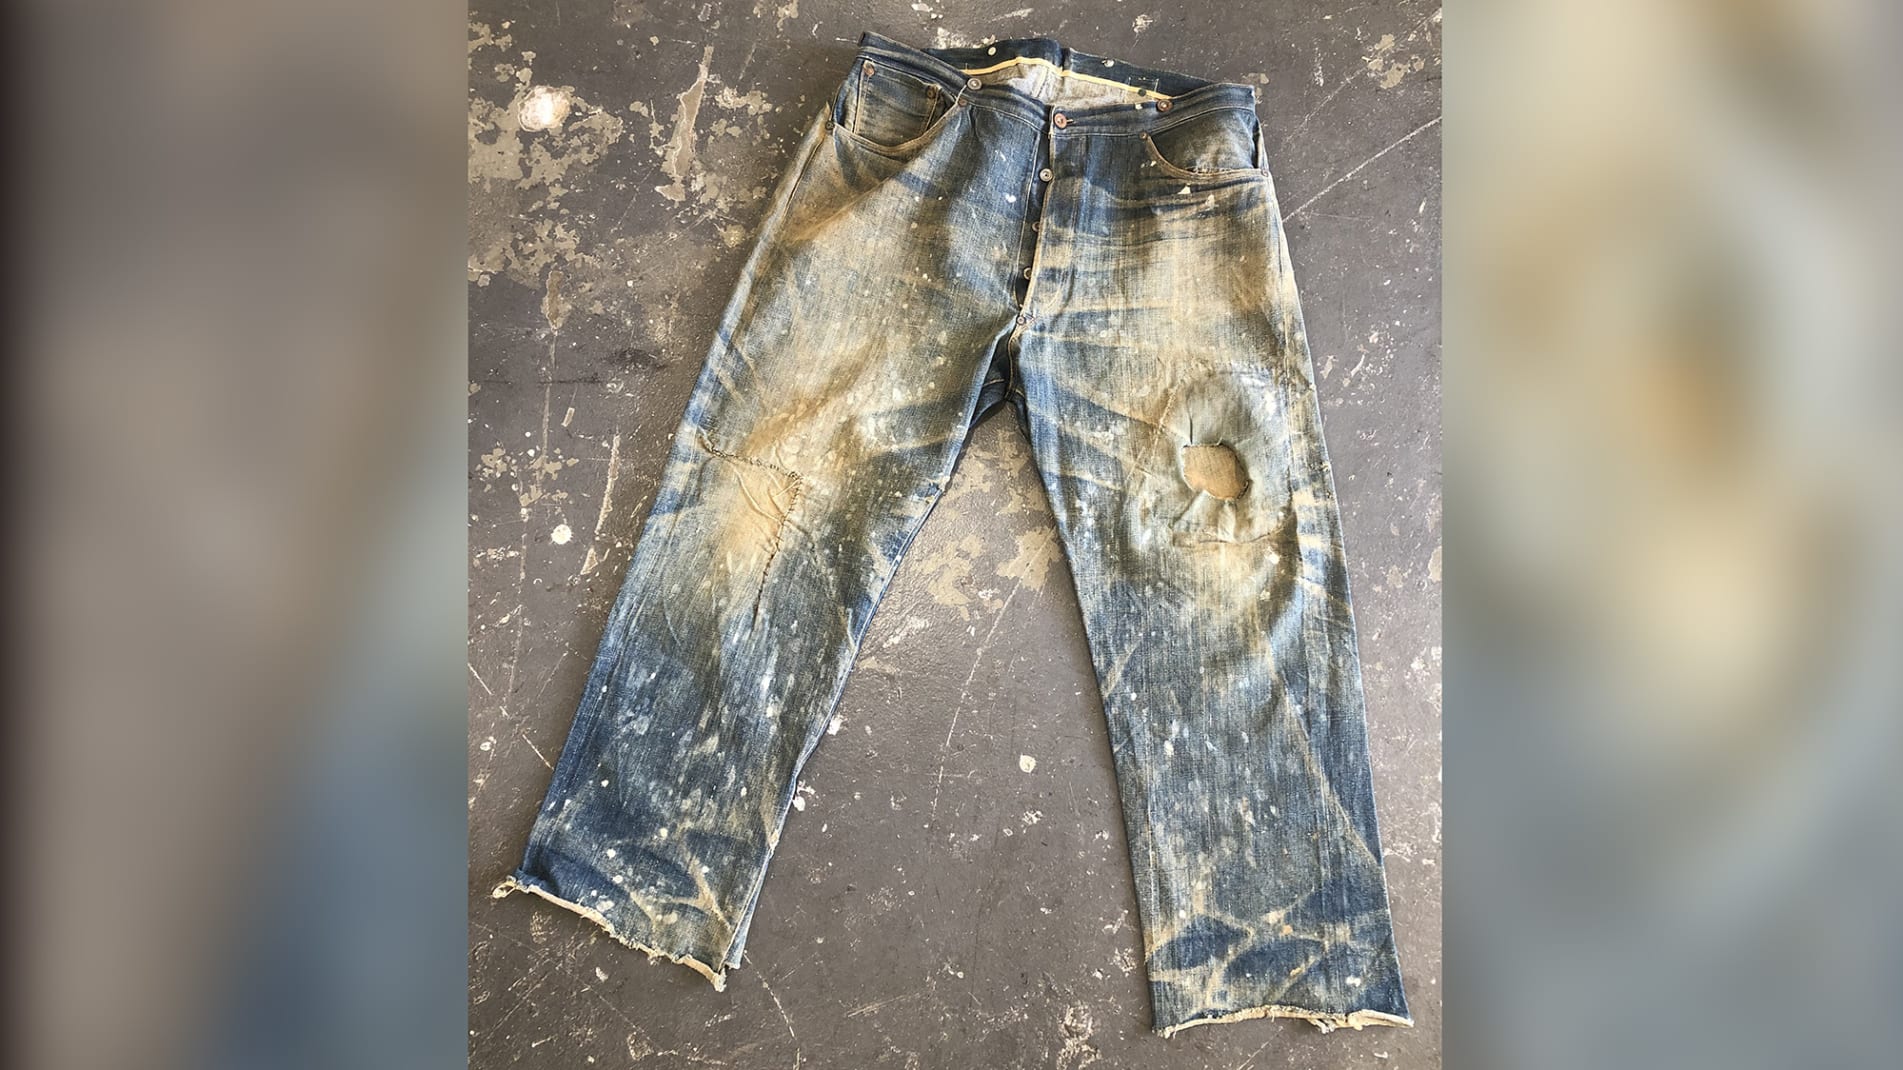 The 19th-century Levi's jeans sold for $87,000 at auction (Zip Stevenson)